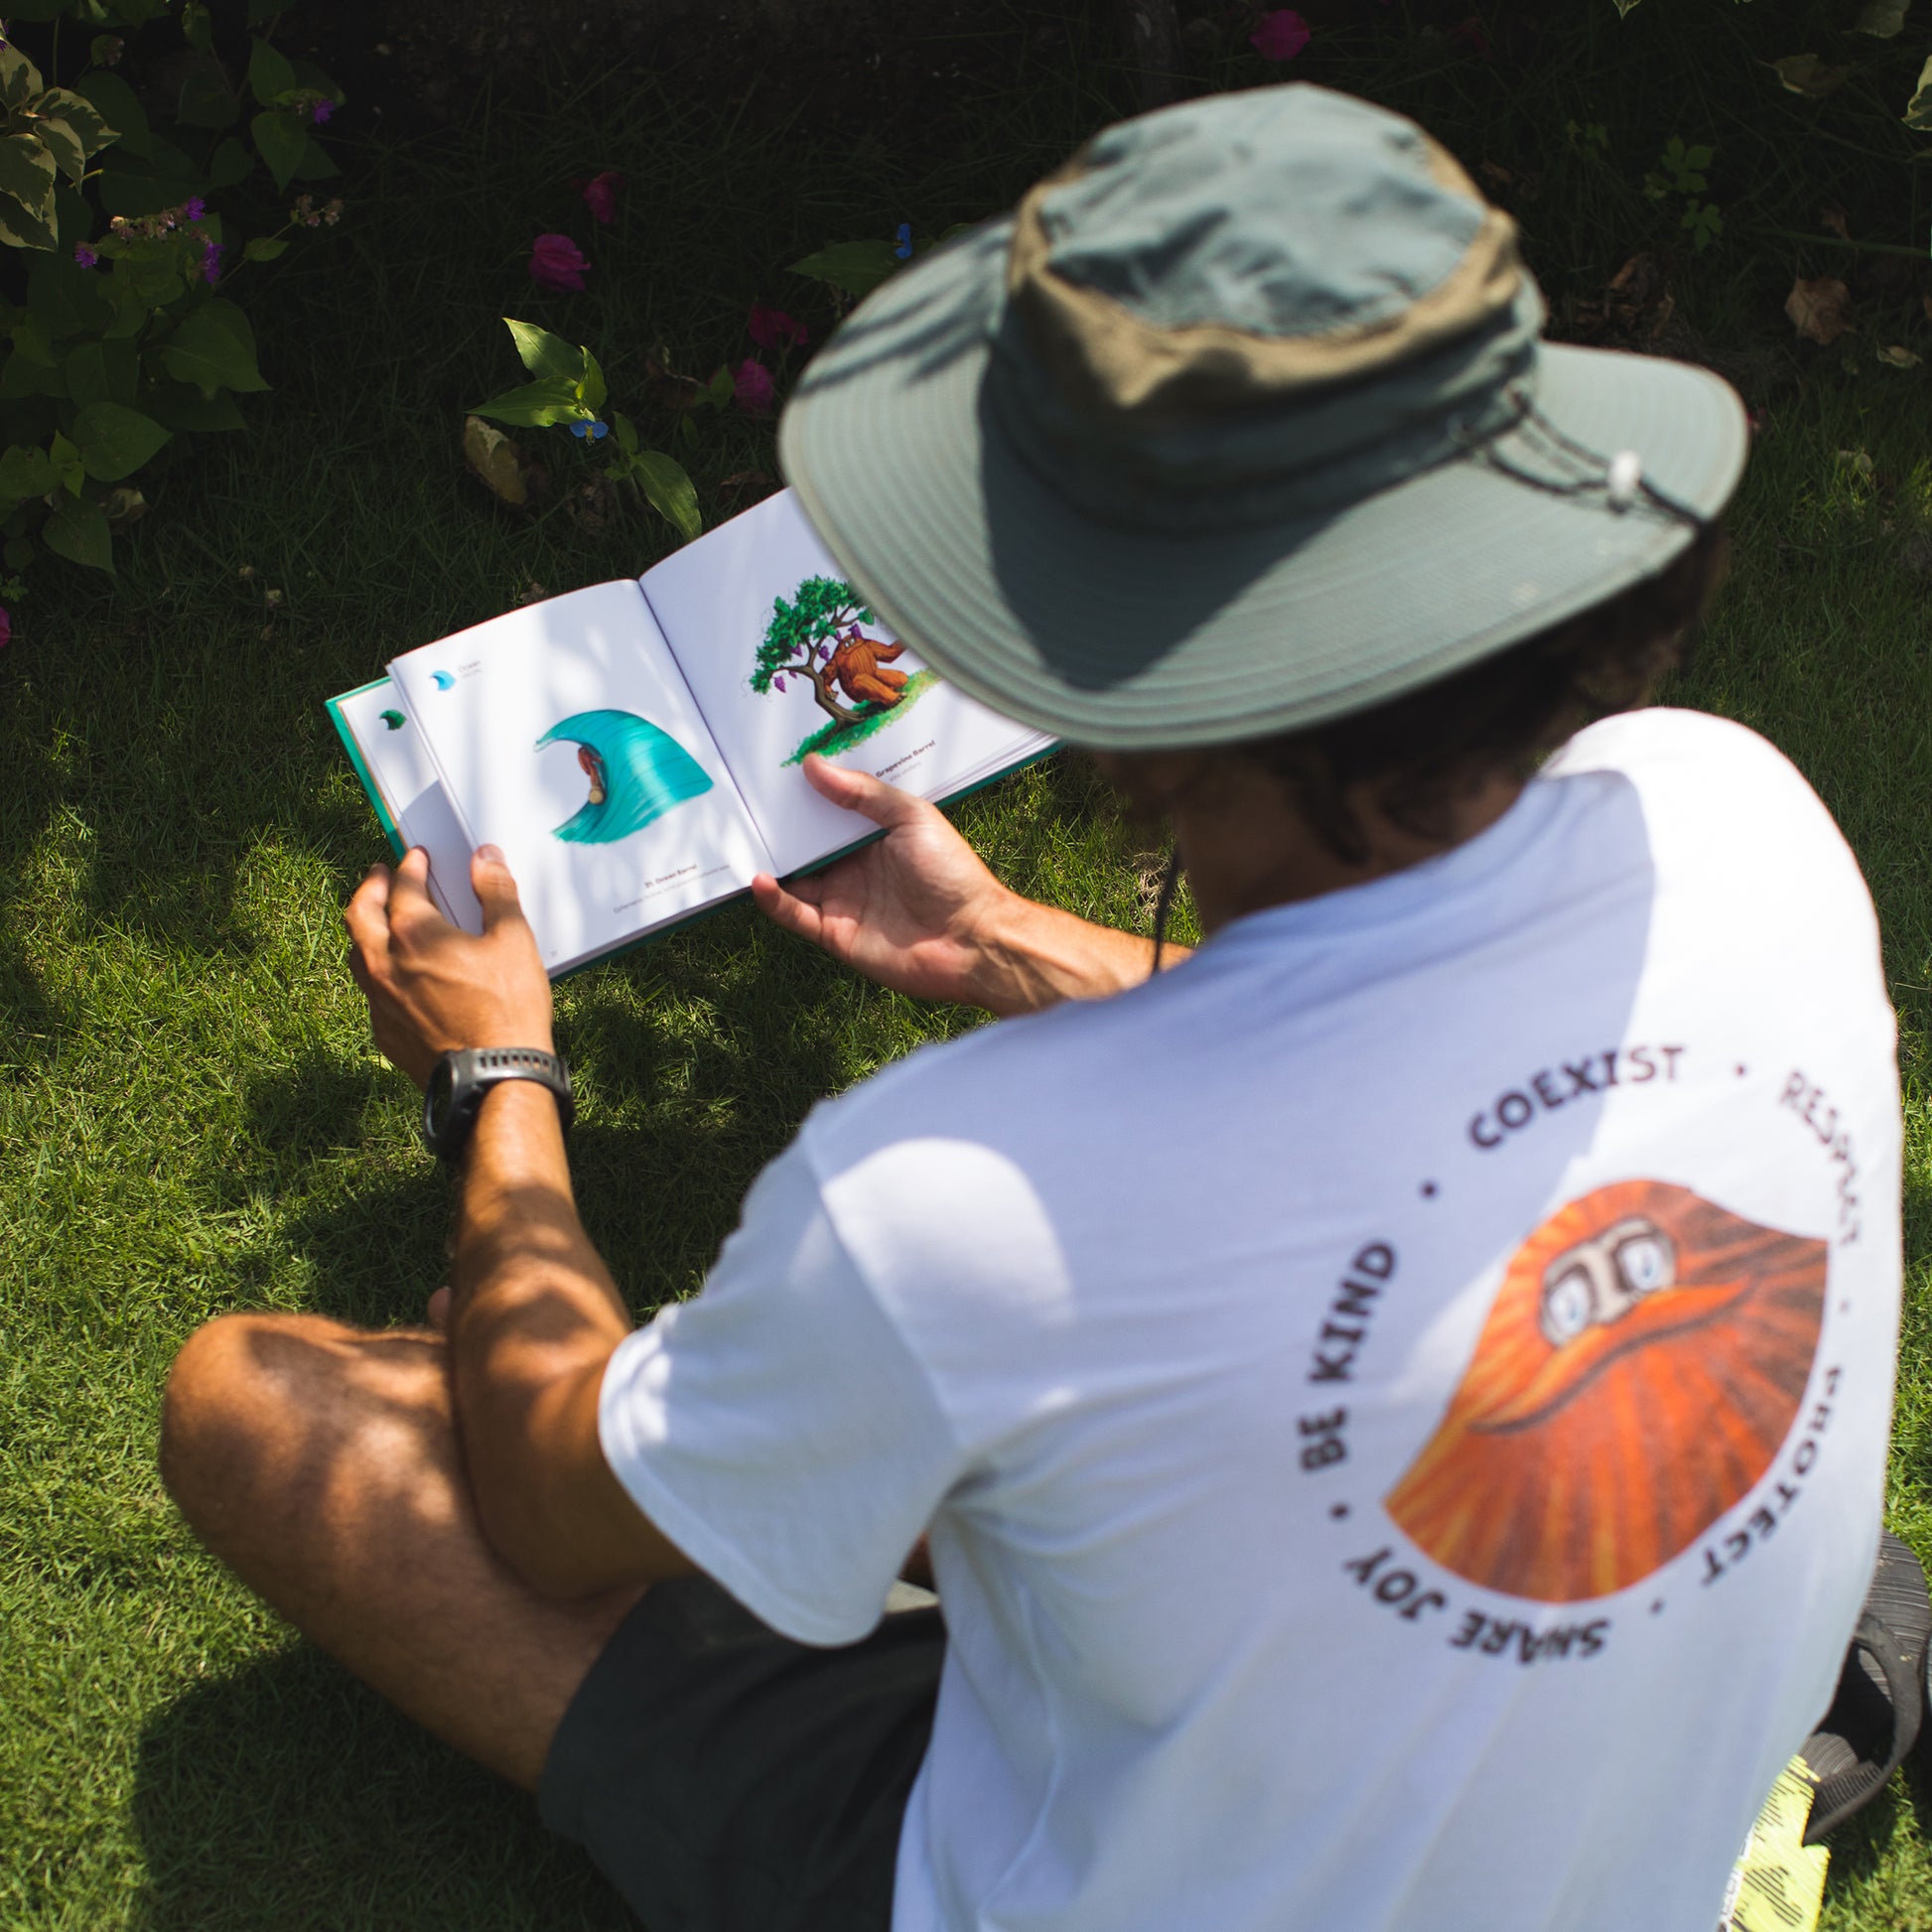 A person in a white t-shirt and a bucket hat is reading an "The Book of Barrels" in the grass, with illustrations visible on the pages as they enjoy a sunny day outdoors.